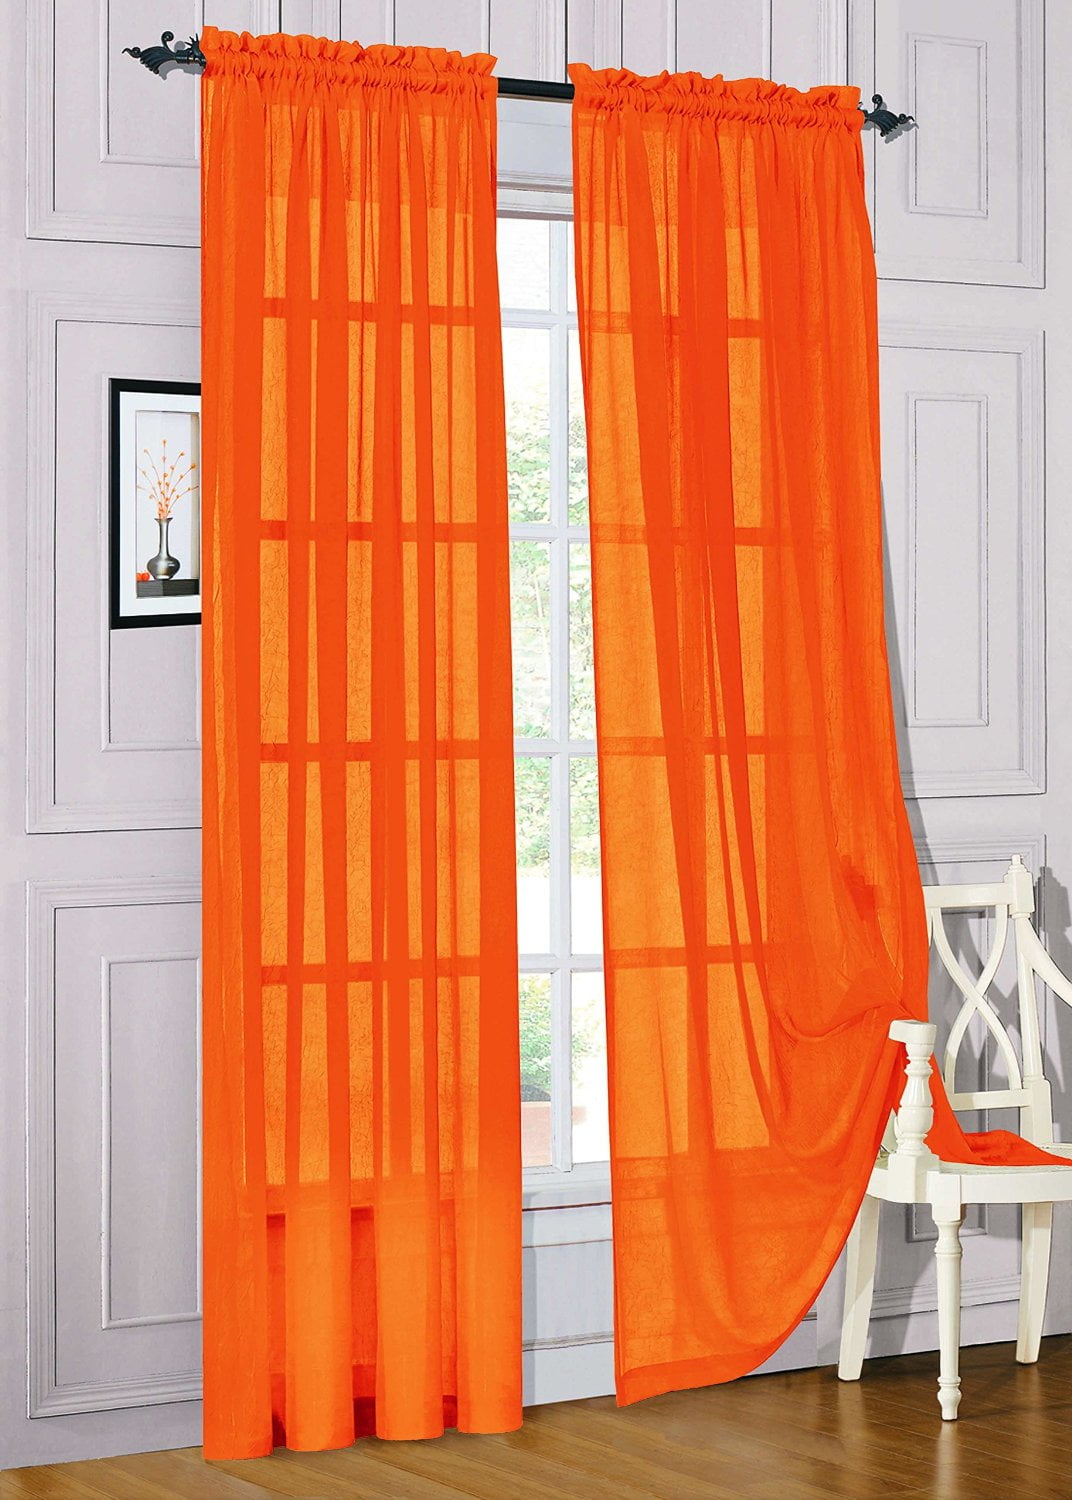 Sheer Curtains Window Voile Panels for Bedroom &Kitchen Set of 2 Pieces Home 